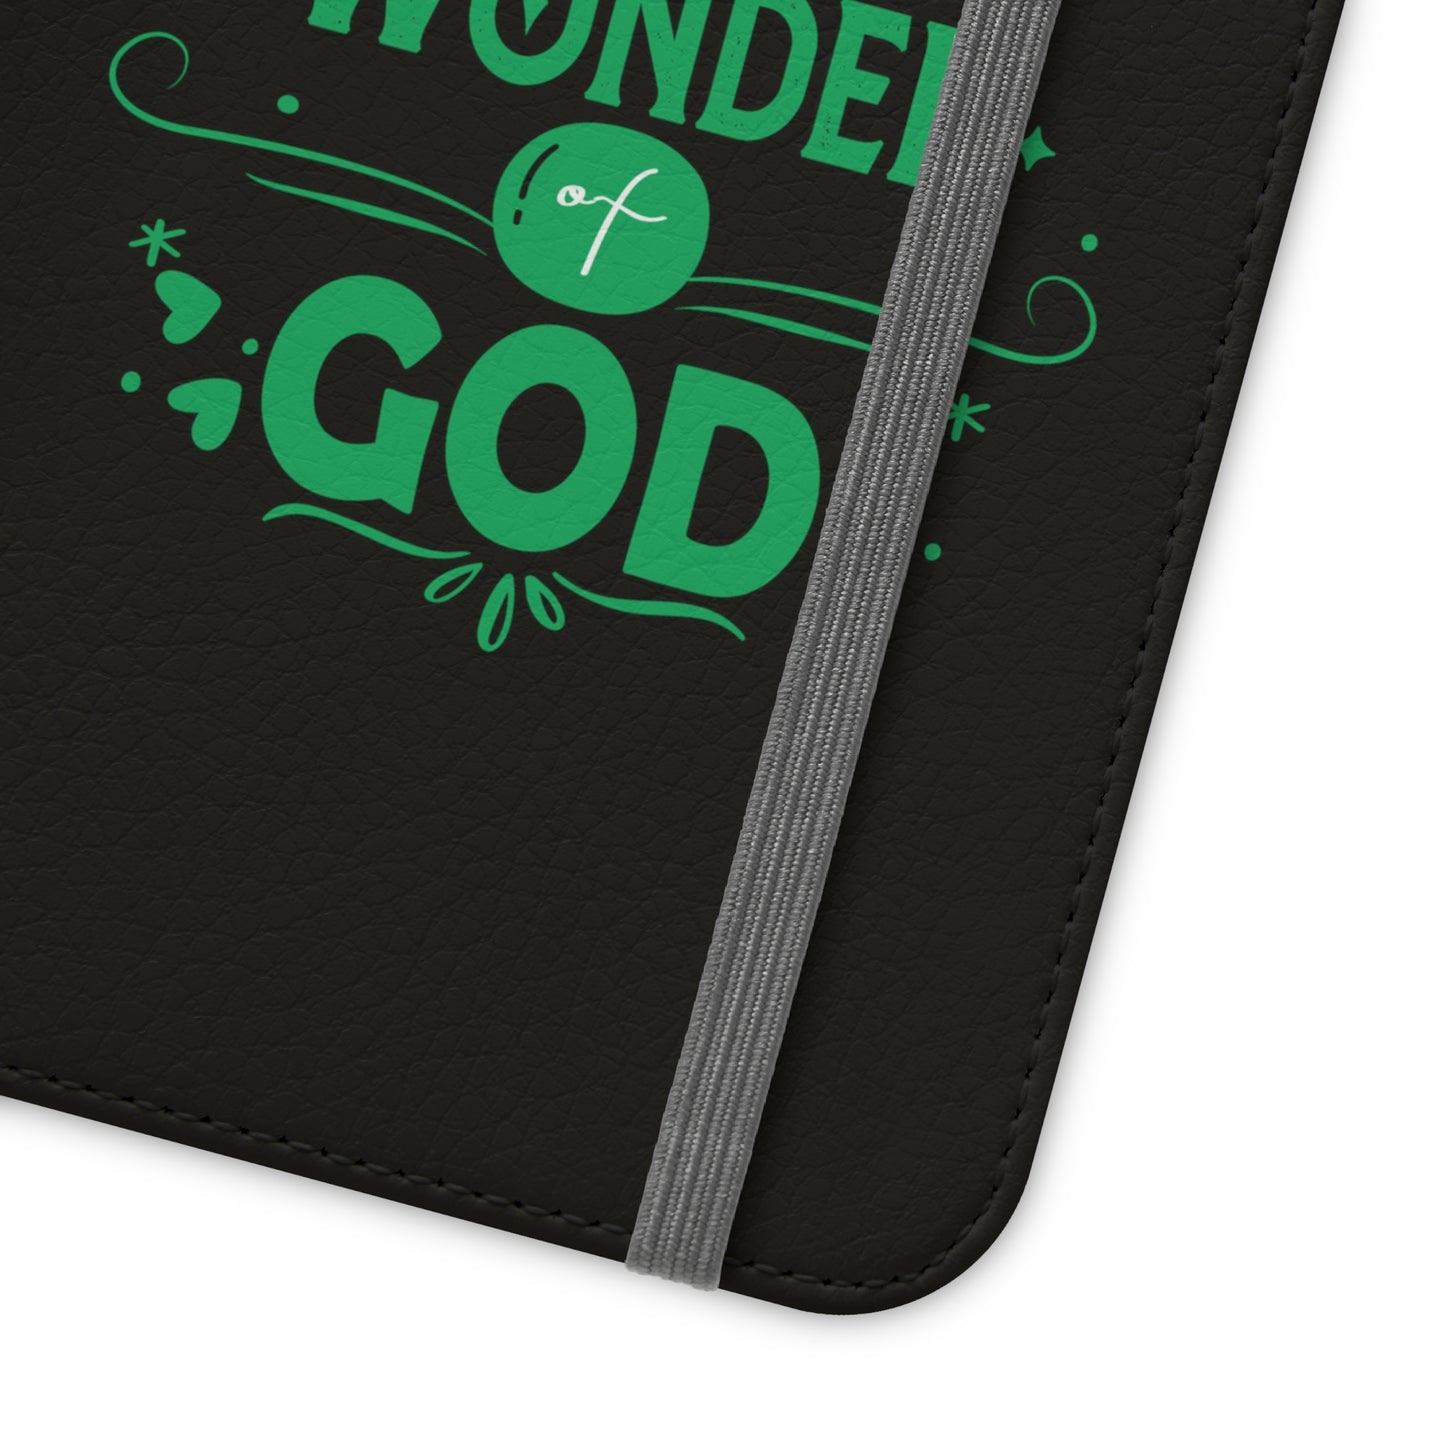 I Am A Miracle Working Wonder Of God Phone Flip Cases